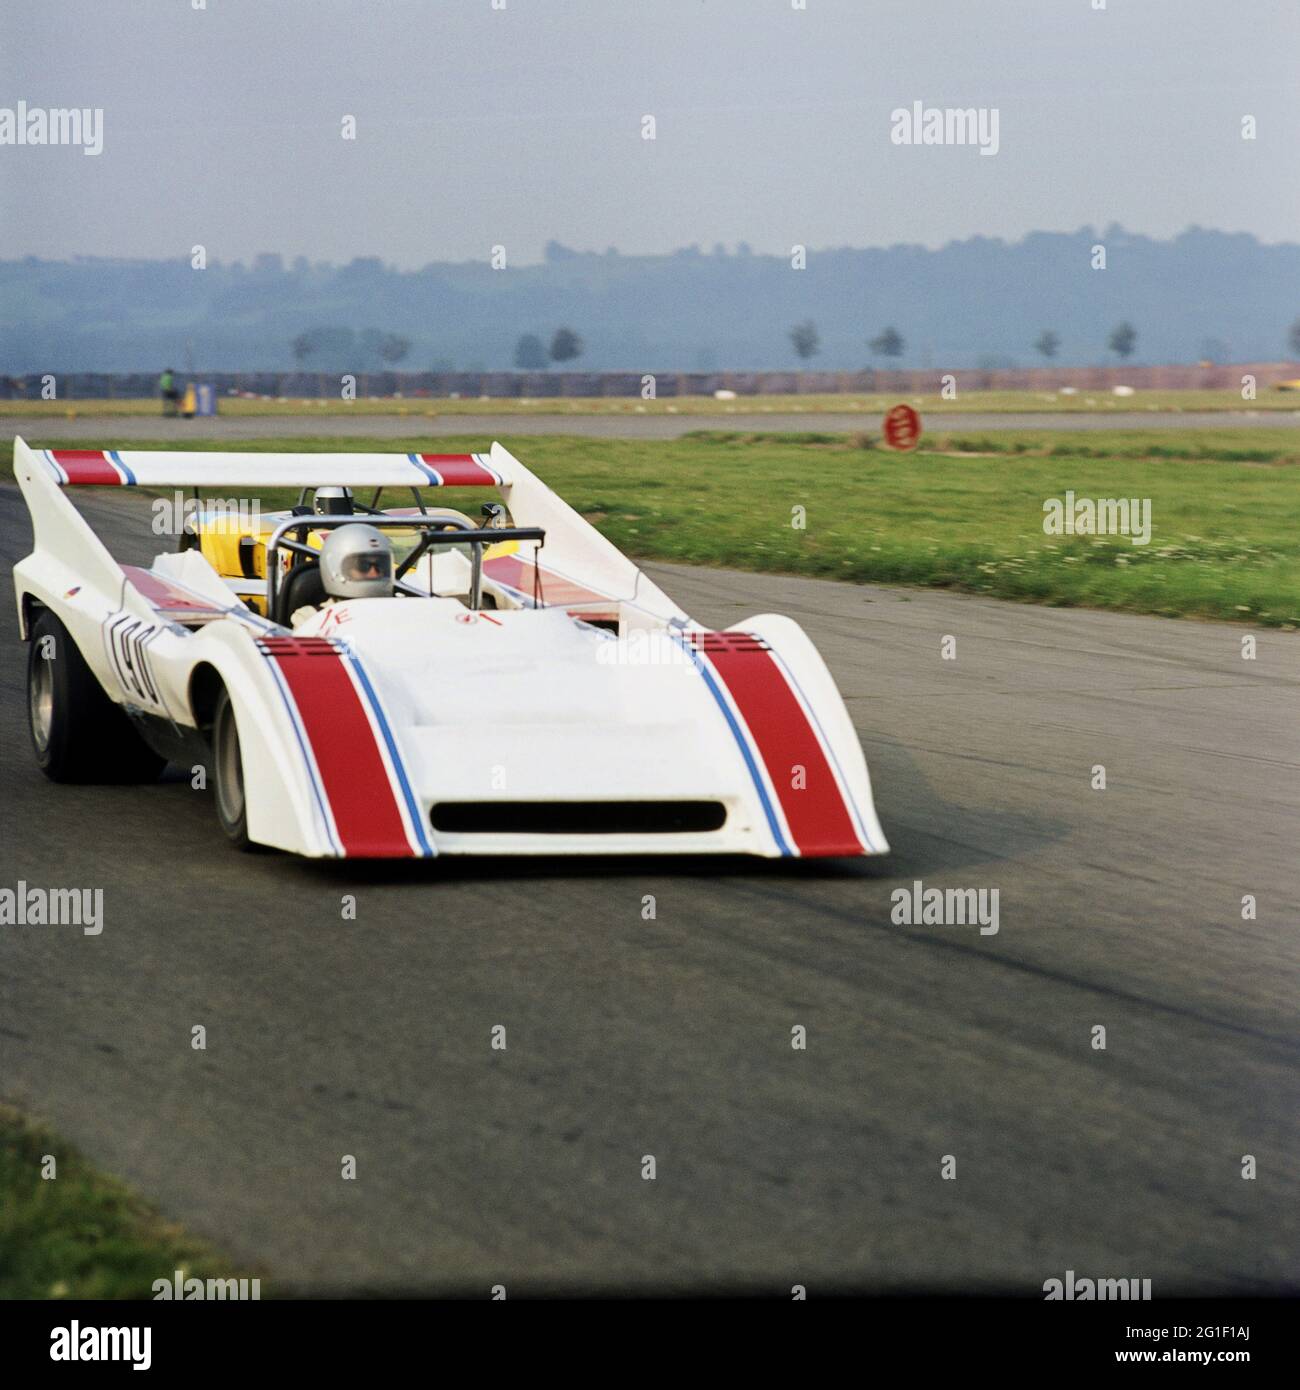 Sport, Auto, zweisitziger Rennwagen, Lola T, 70er Jahre, ADDITIONAL-RIGHTS-CLEARANCE-INFO-NOT-AVAILABLE Stockfoto